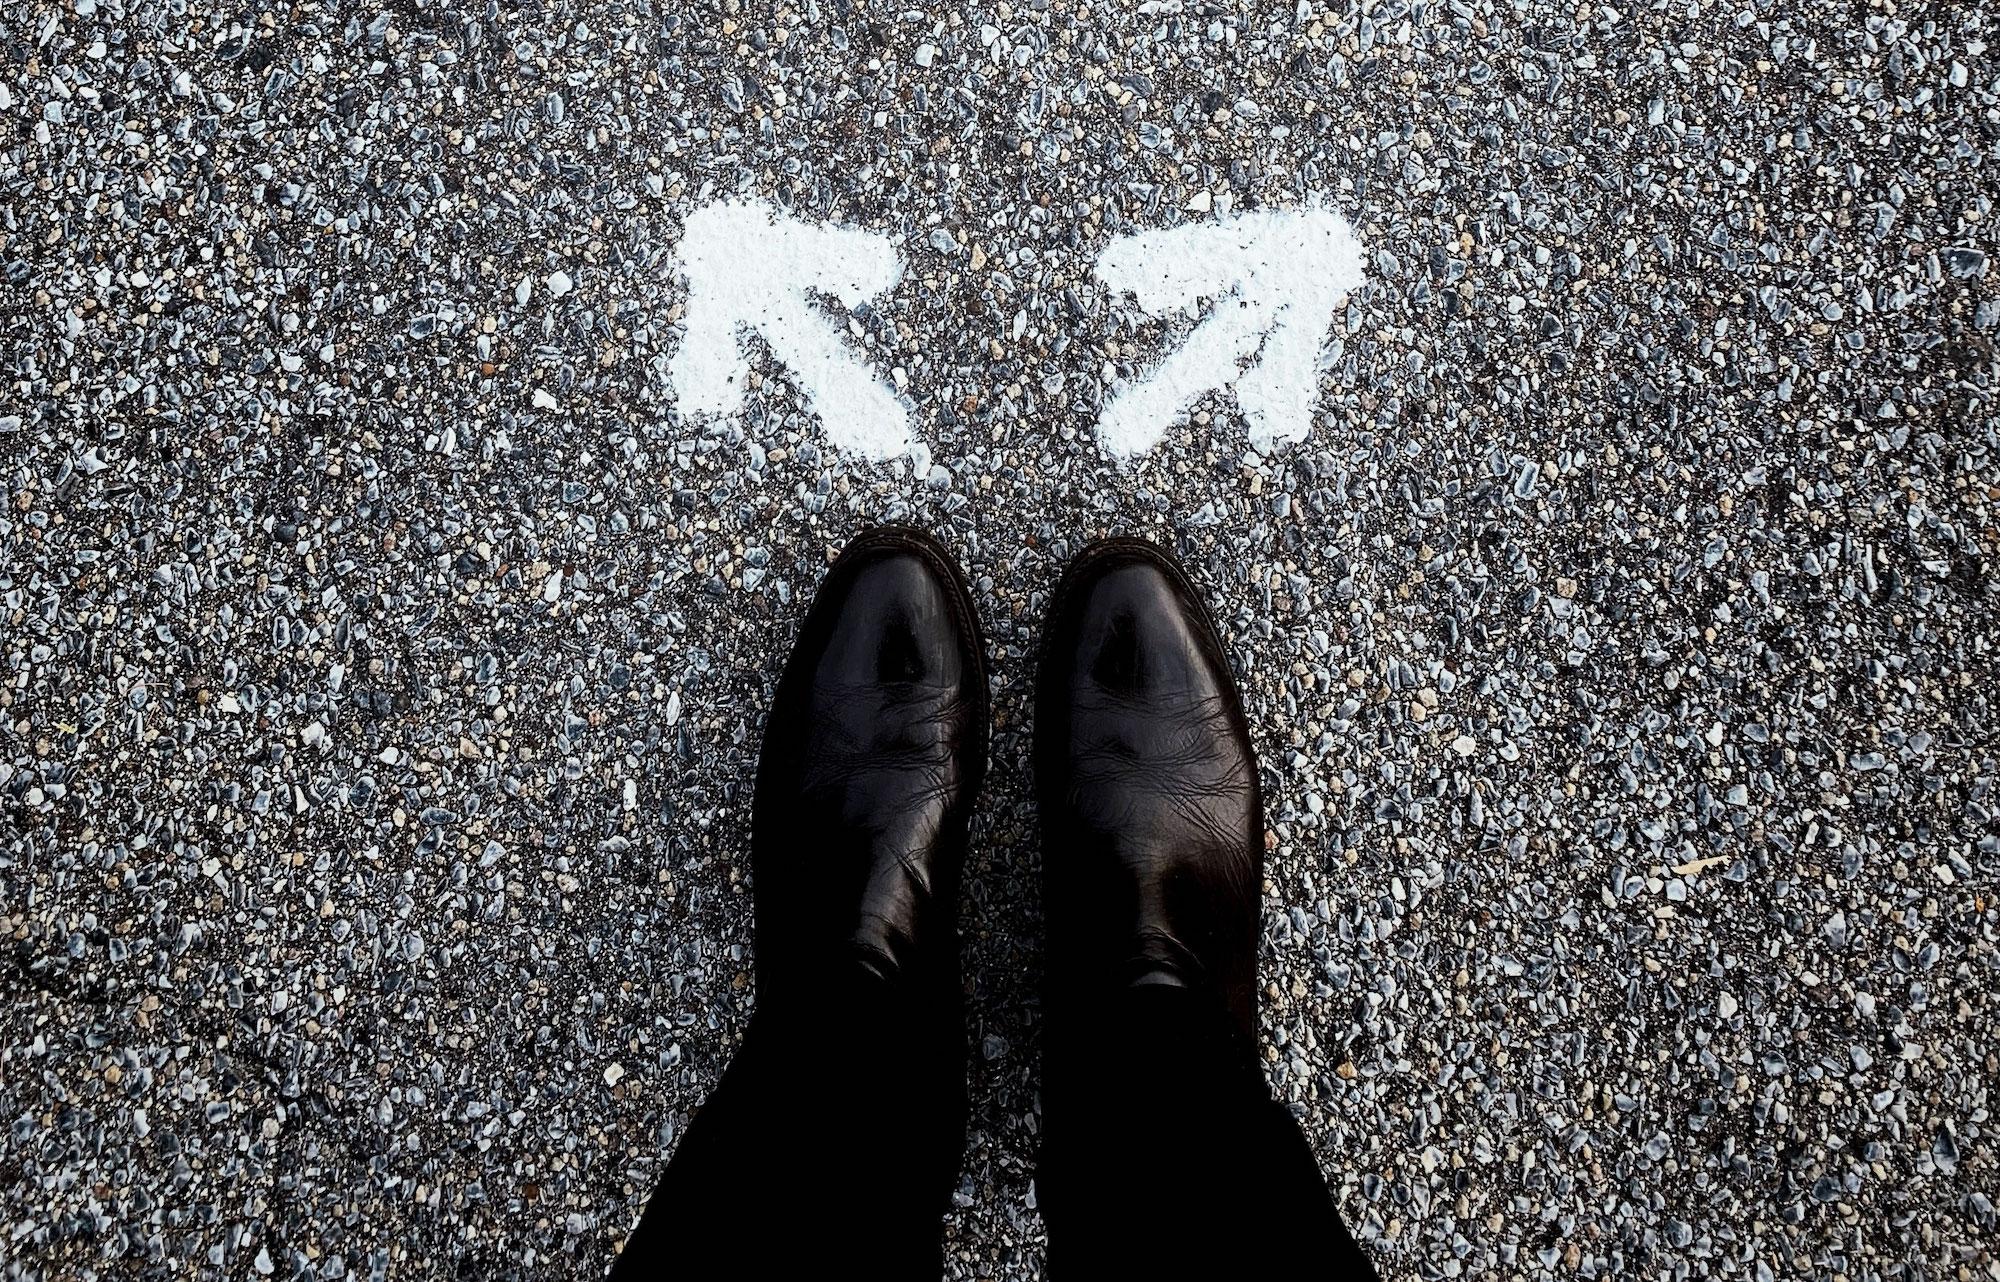 Two feet wearing black boots stand on concrete. In front of the toes, white arrows point in opposite directions.